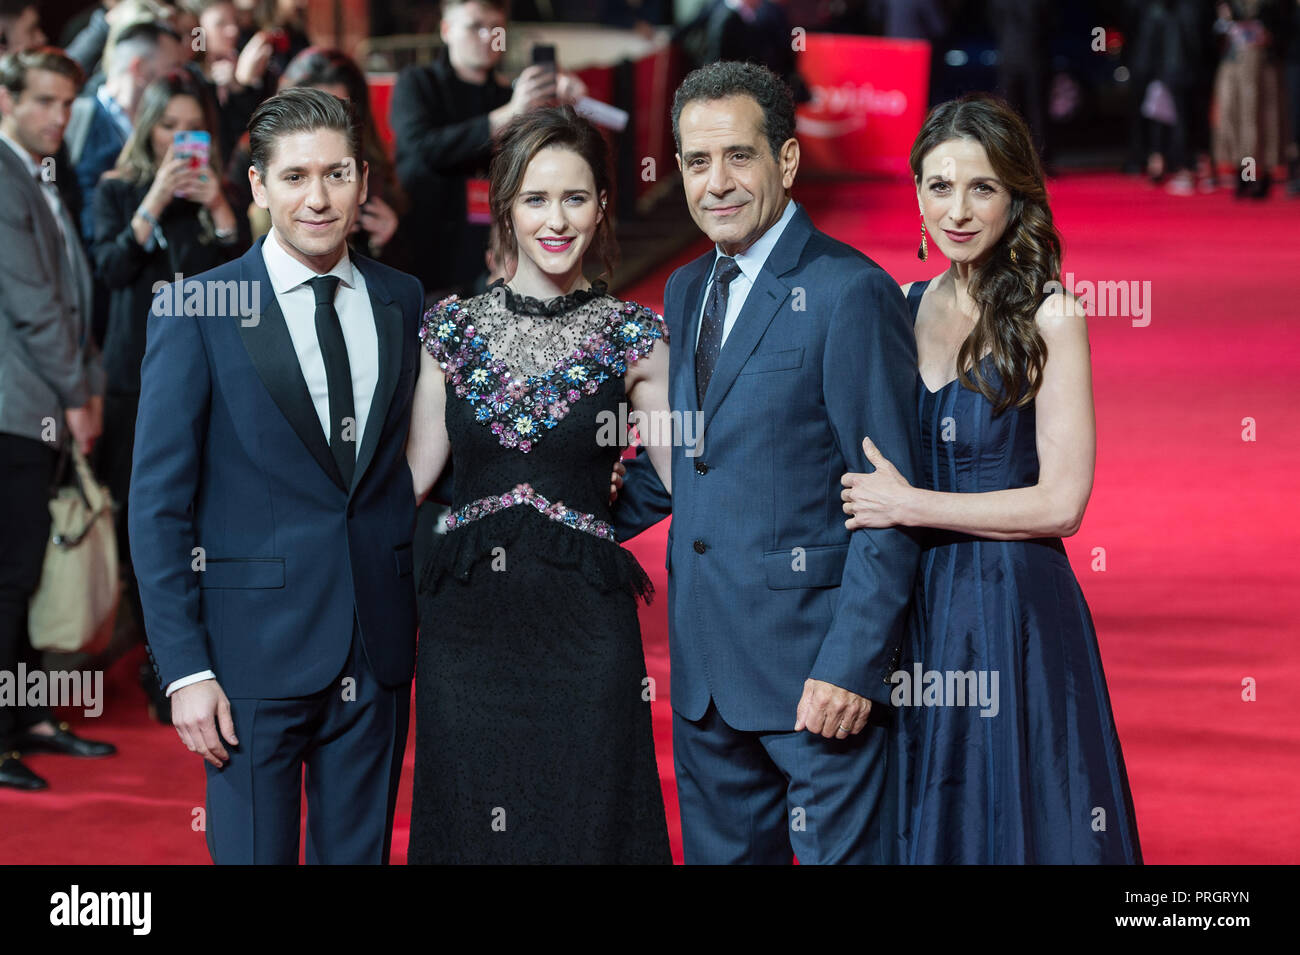 London, UK. 2nd October 2018. Cast of 'The Marvelous Mrs. Maisel' (L-R) Michael Zegen, Rachel Brosnahan, Tony Shalhoub and Marin Hinkle attend the World premiere of 'The Romanoffs' at Curzon Mayfair cinema in London. Credit: Wiktor Szymanowicz/Alamy Live News Stock Photo